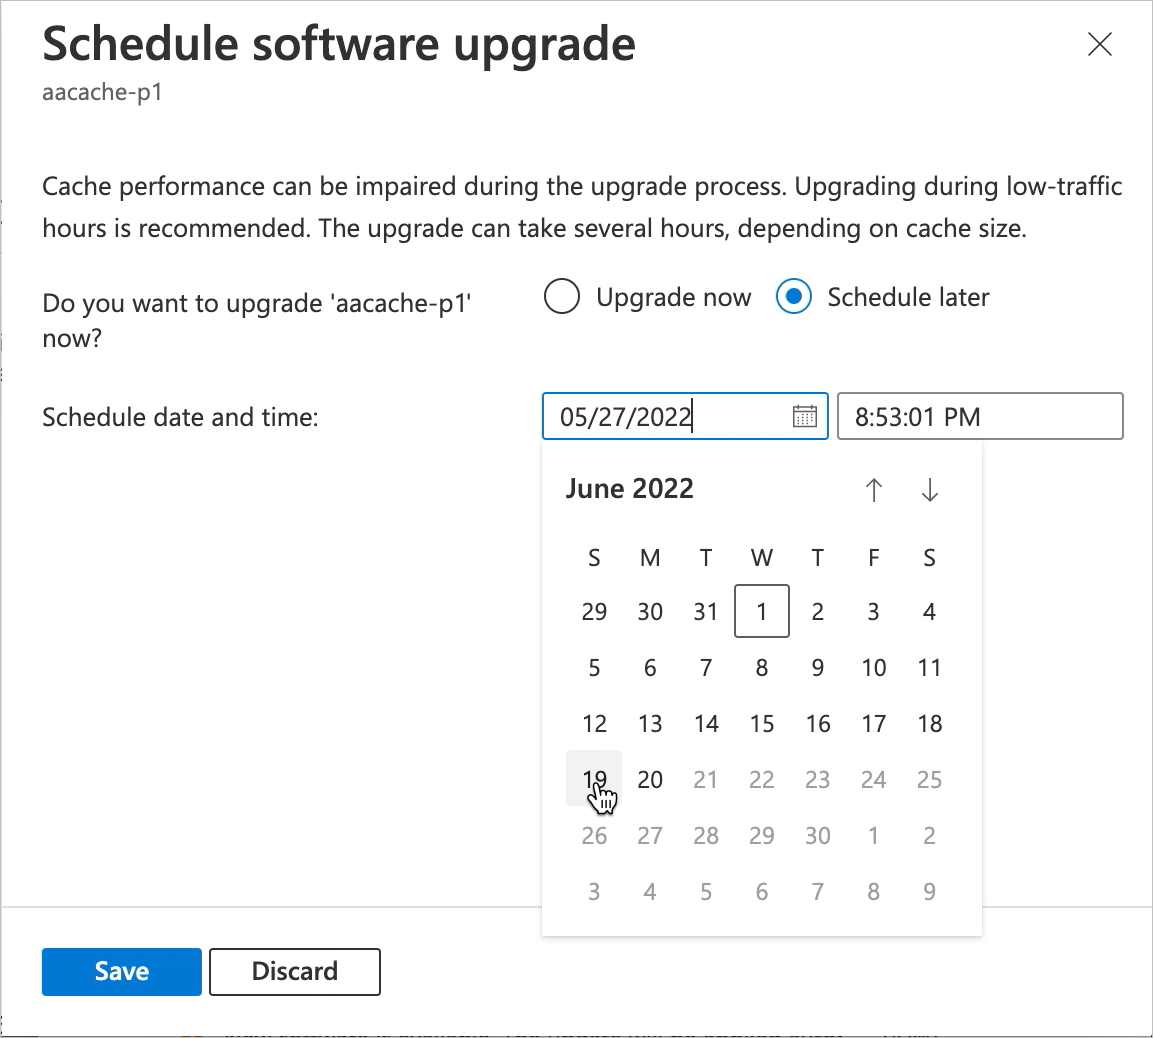 Screenshot of the Schedule software upgrade blade showing radio buttons with "Schedule later" selected and fields to select a new date and time.